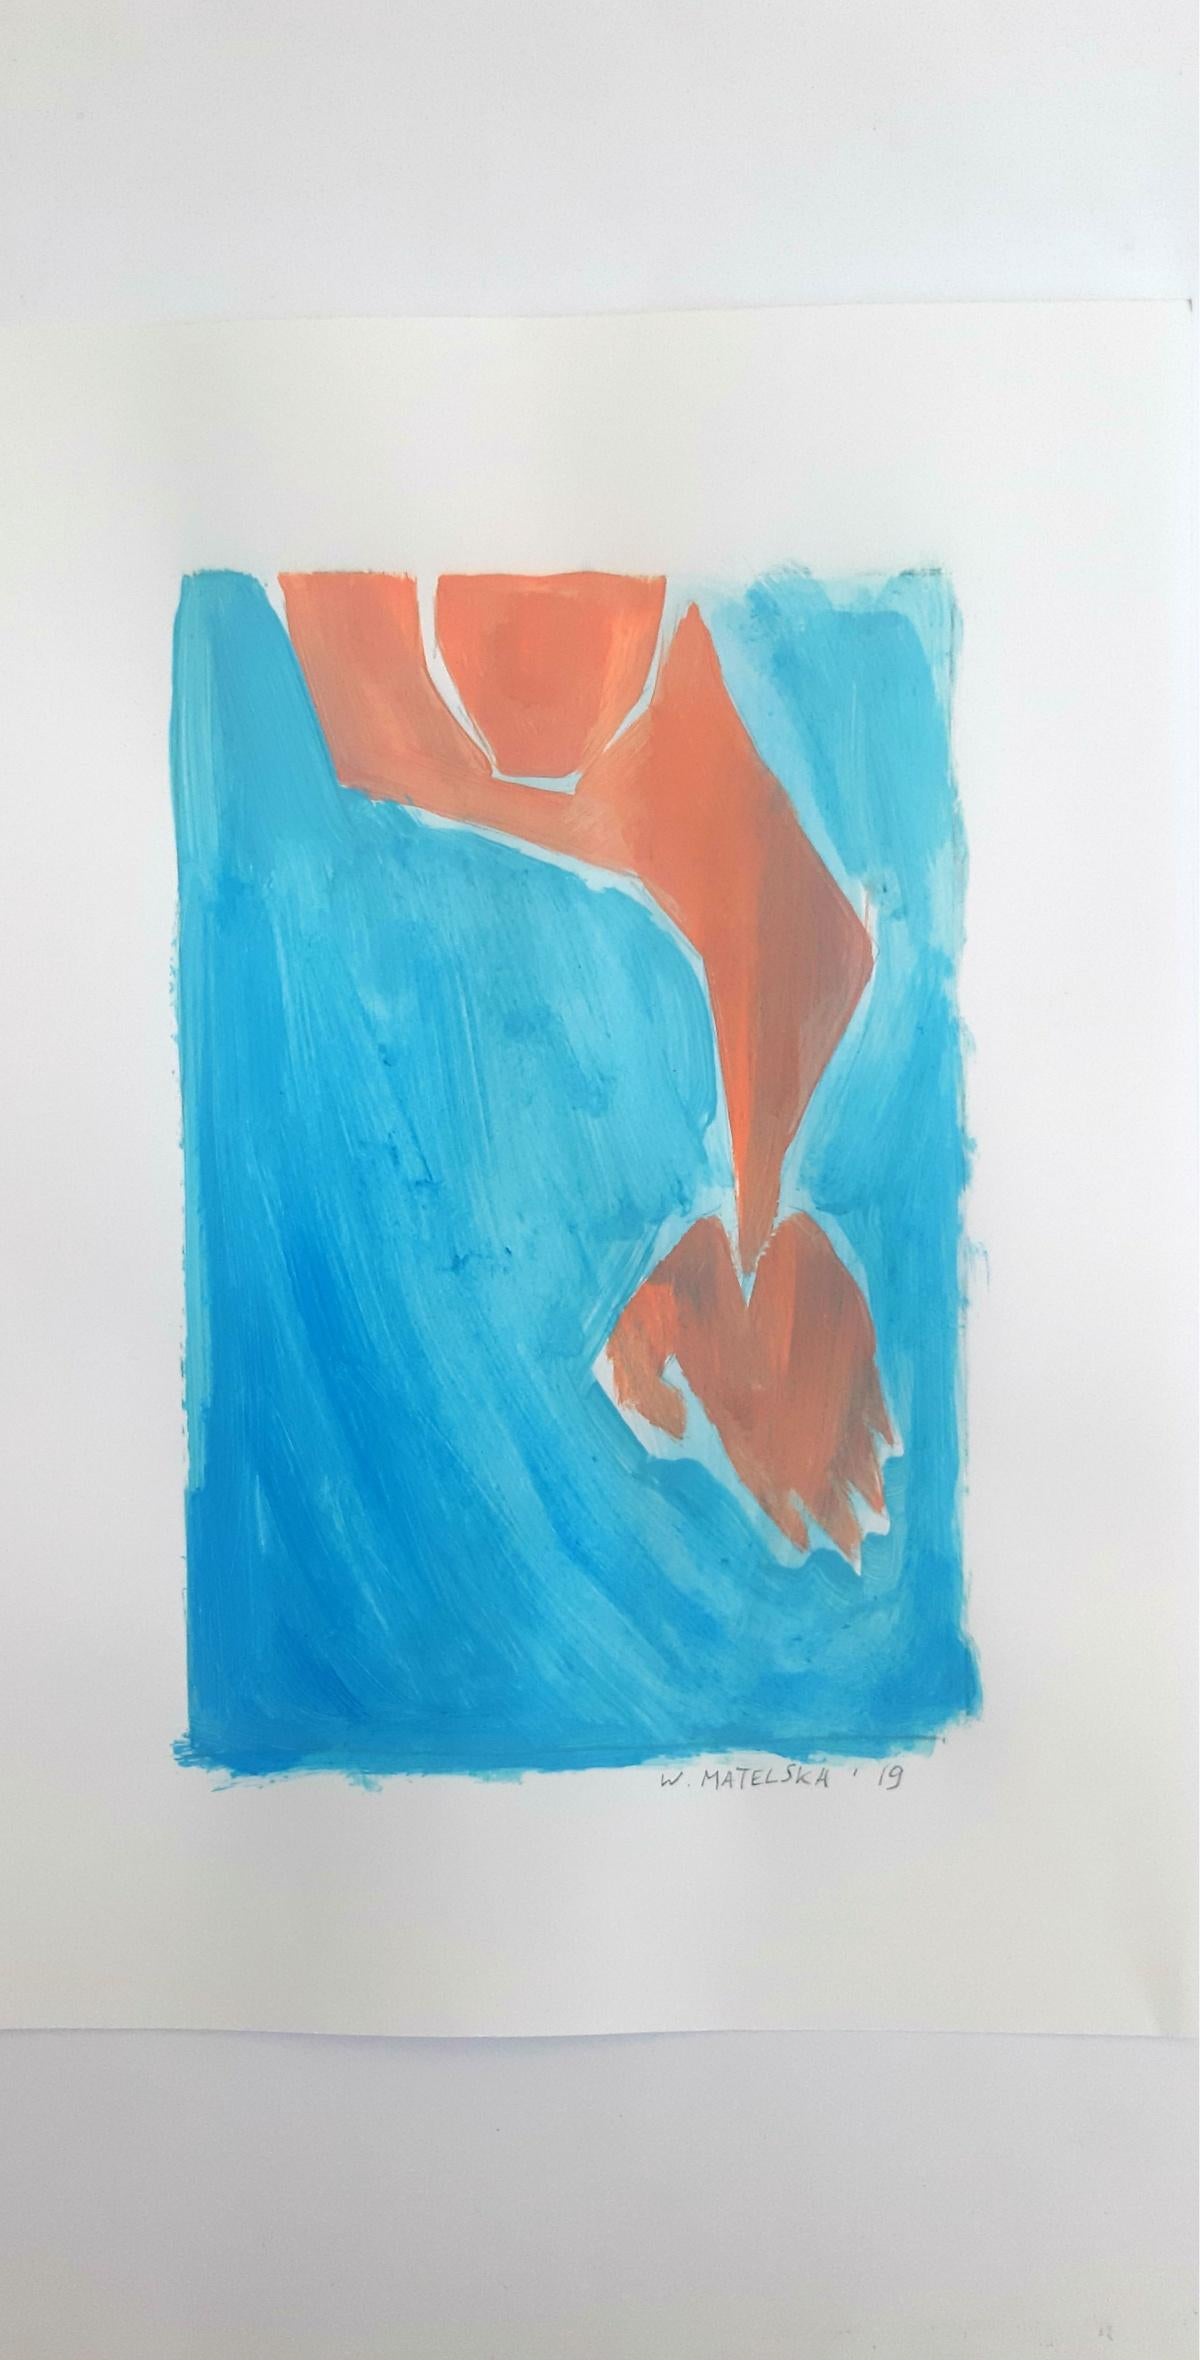 A swimmer - Figurative Acrylic Painting on Paper, Vibrant blue & orange 2